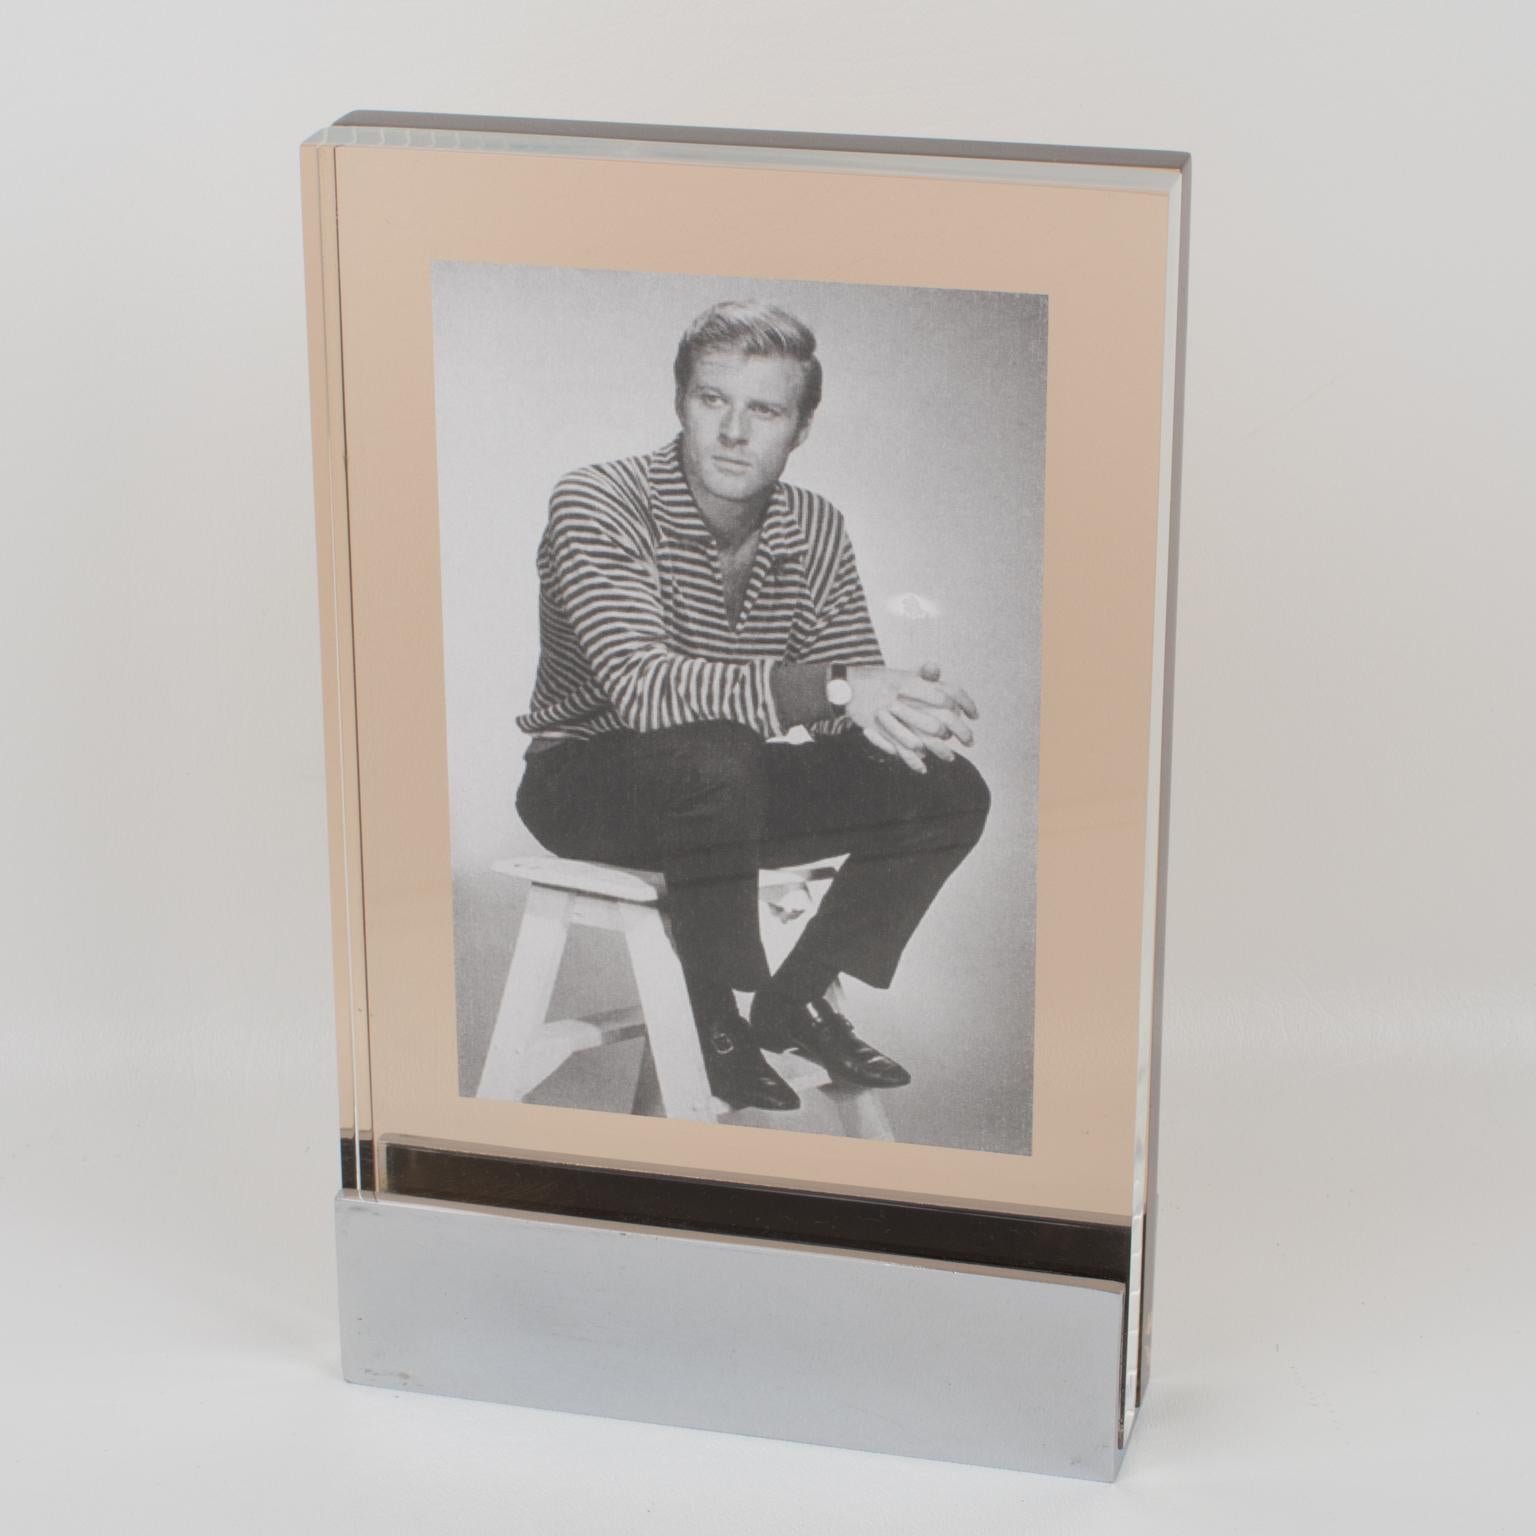 This is a beautiful French Machine Age metal and Lucite photo frame with a modernist industrial design from the 1960s. The chromed metal base holder has visible screws and holds the photography between two extra-thick Lucite slabs, one transparent